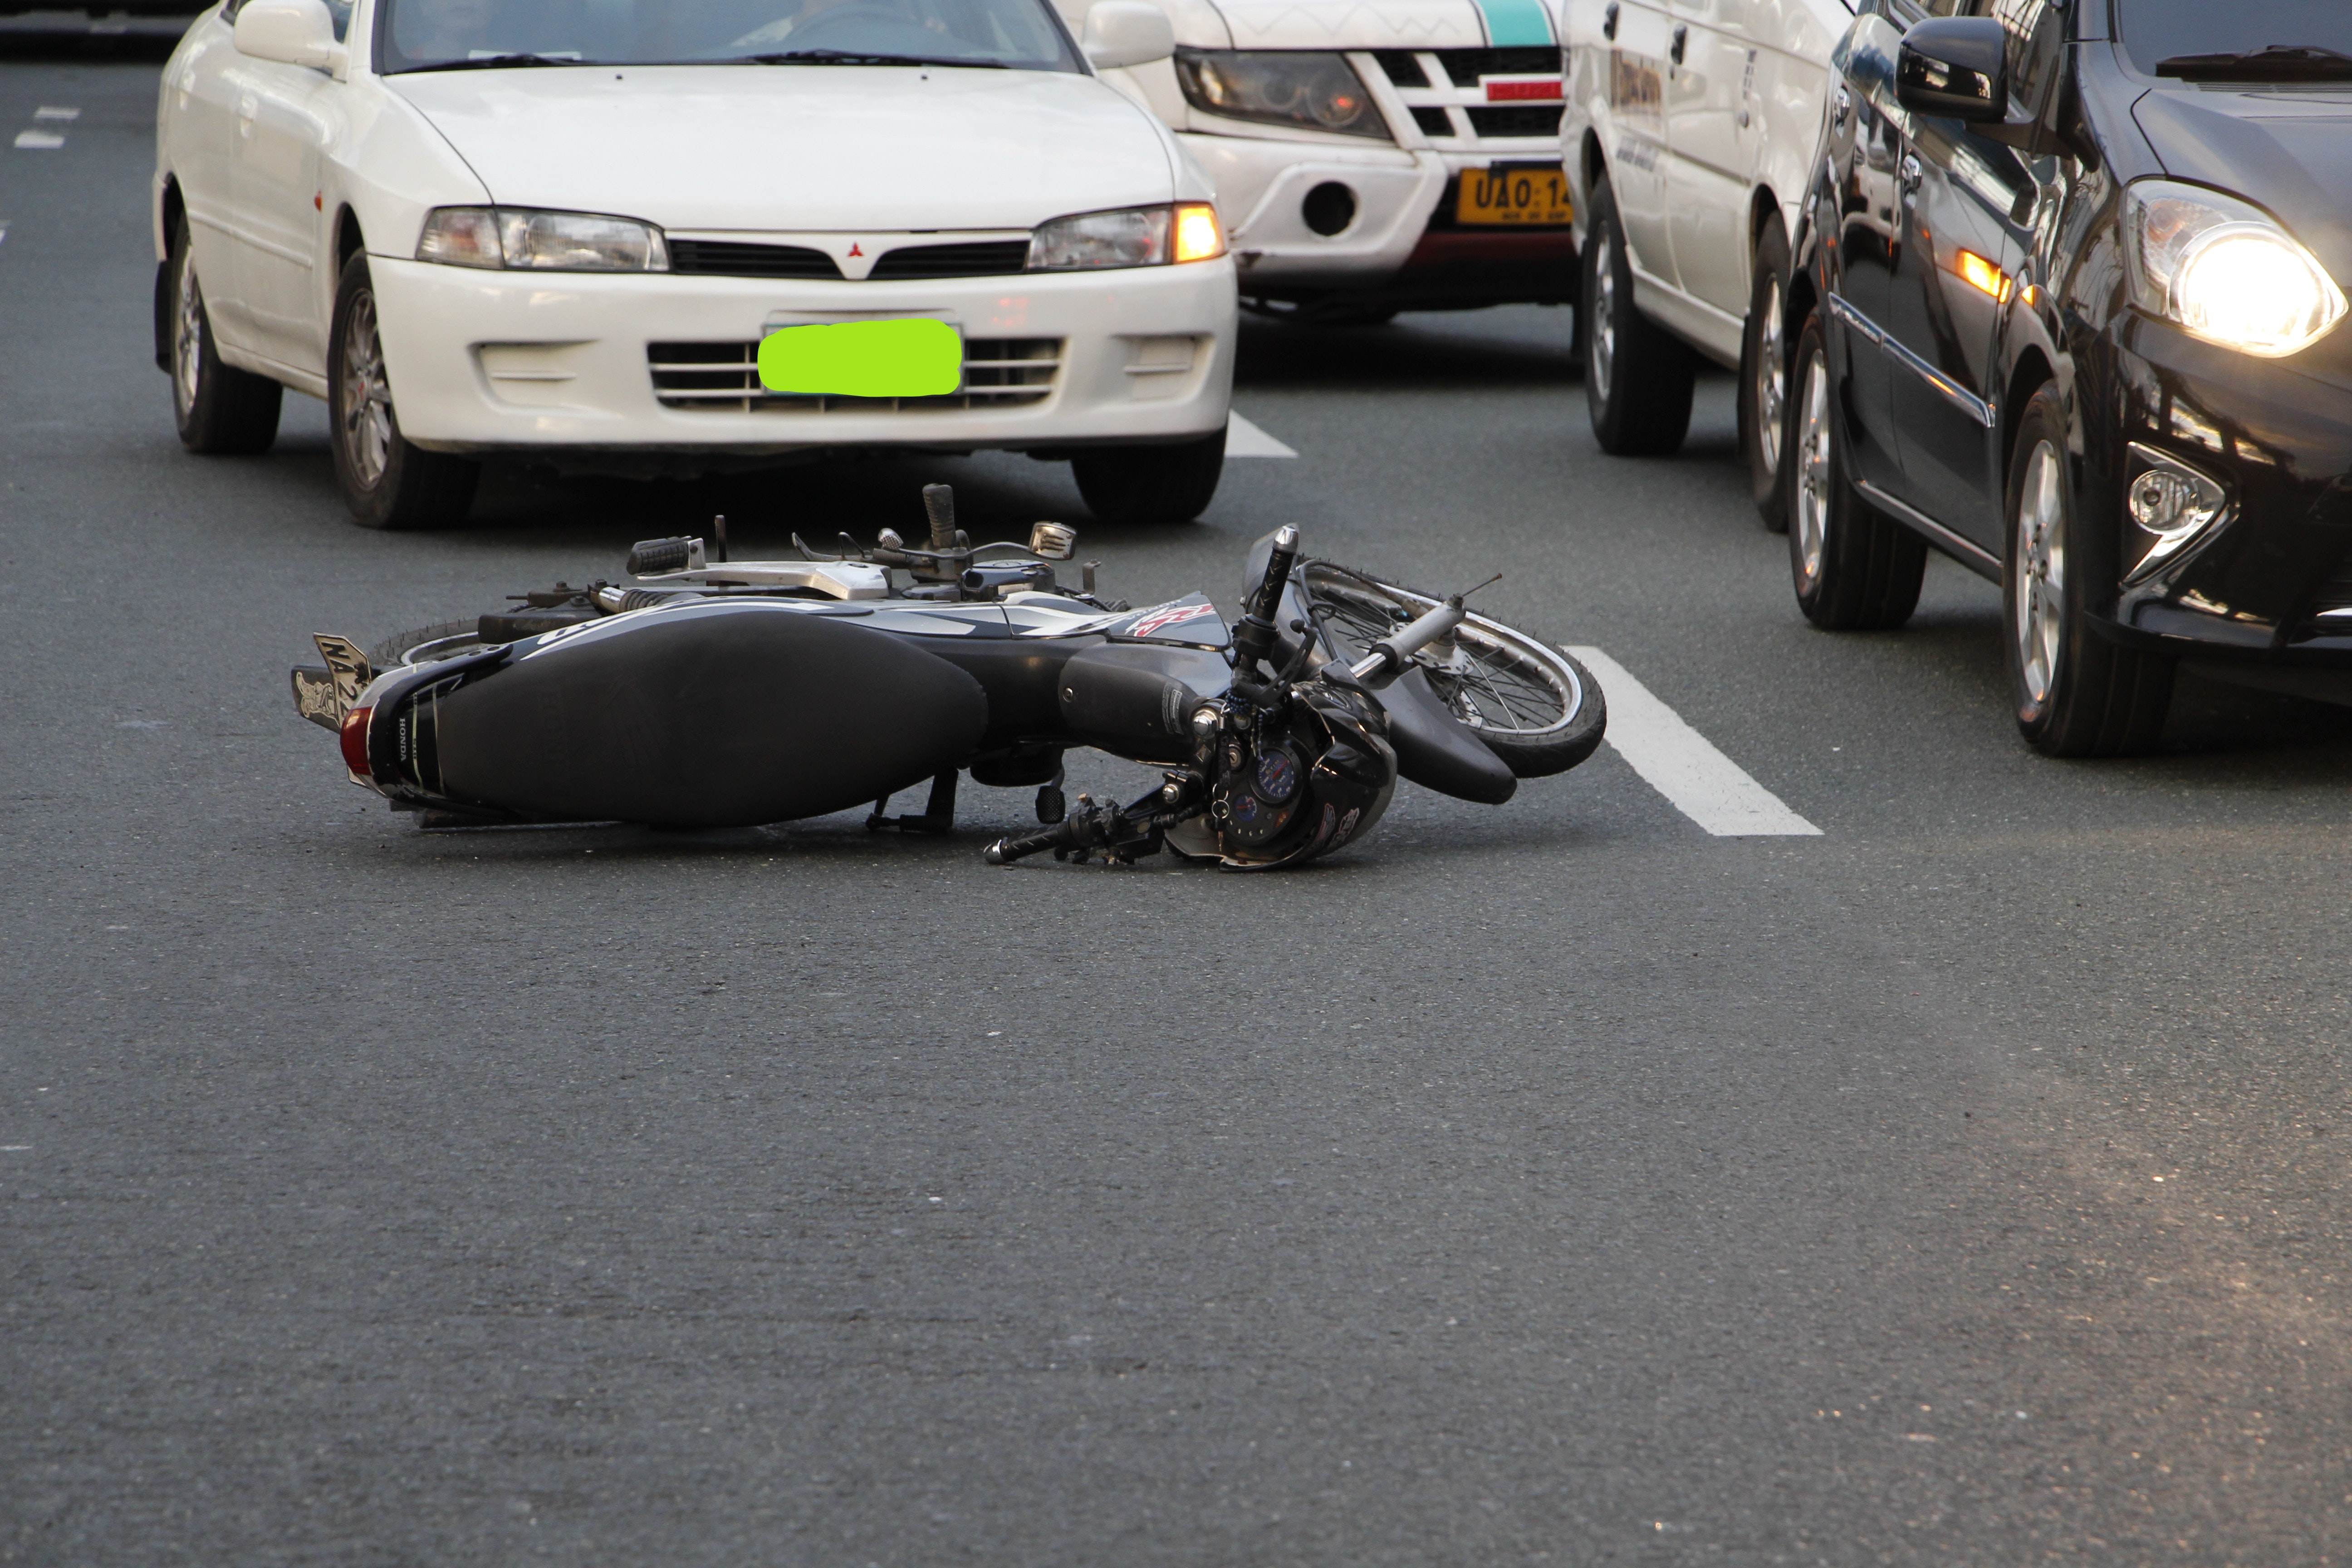 A motorcycle lies on its side in the middle of an asphalt road, with various cars halted around it, indicating a recent bike accident. The scene captures a common urban traffic incident, with the focus on the motorcycle's position, suggesting a disruption in the flow of traffic.